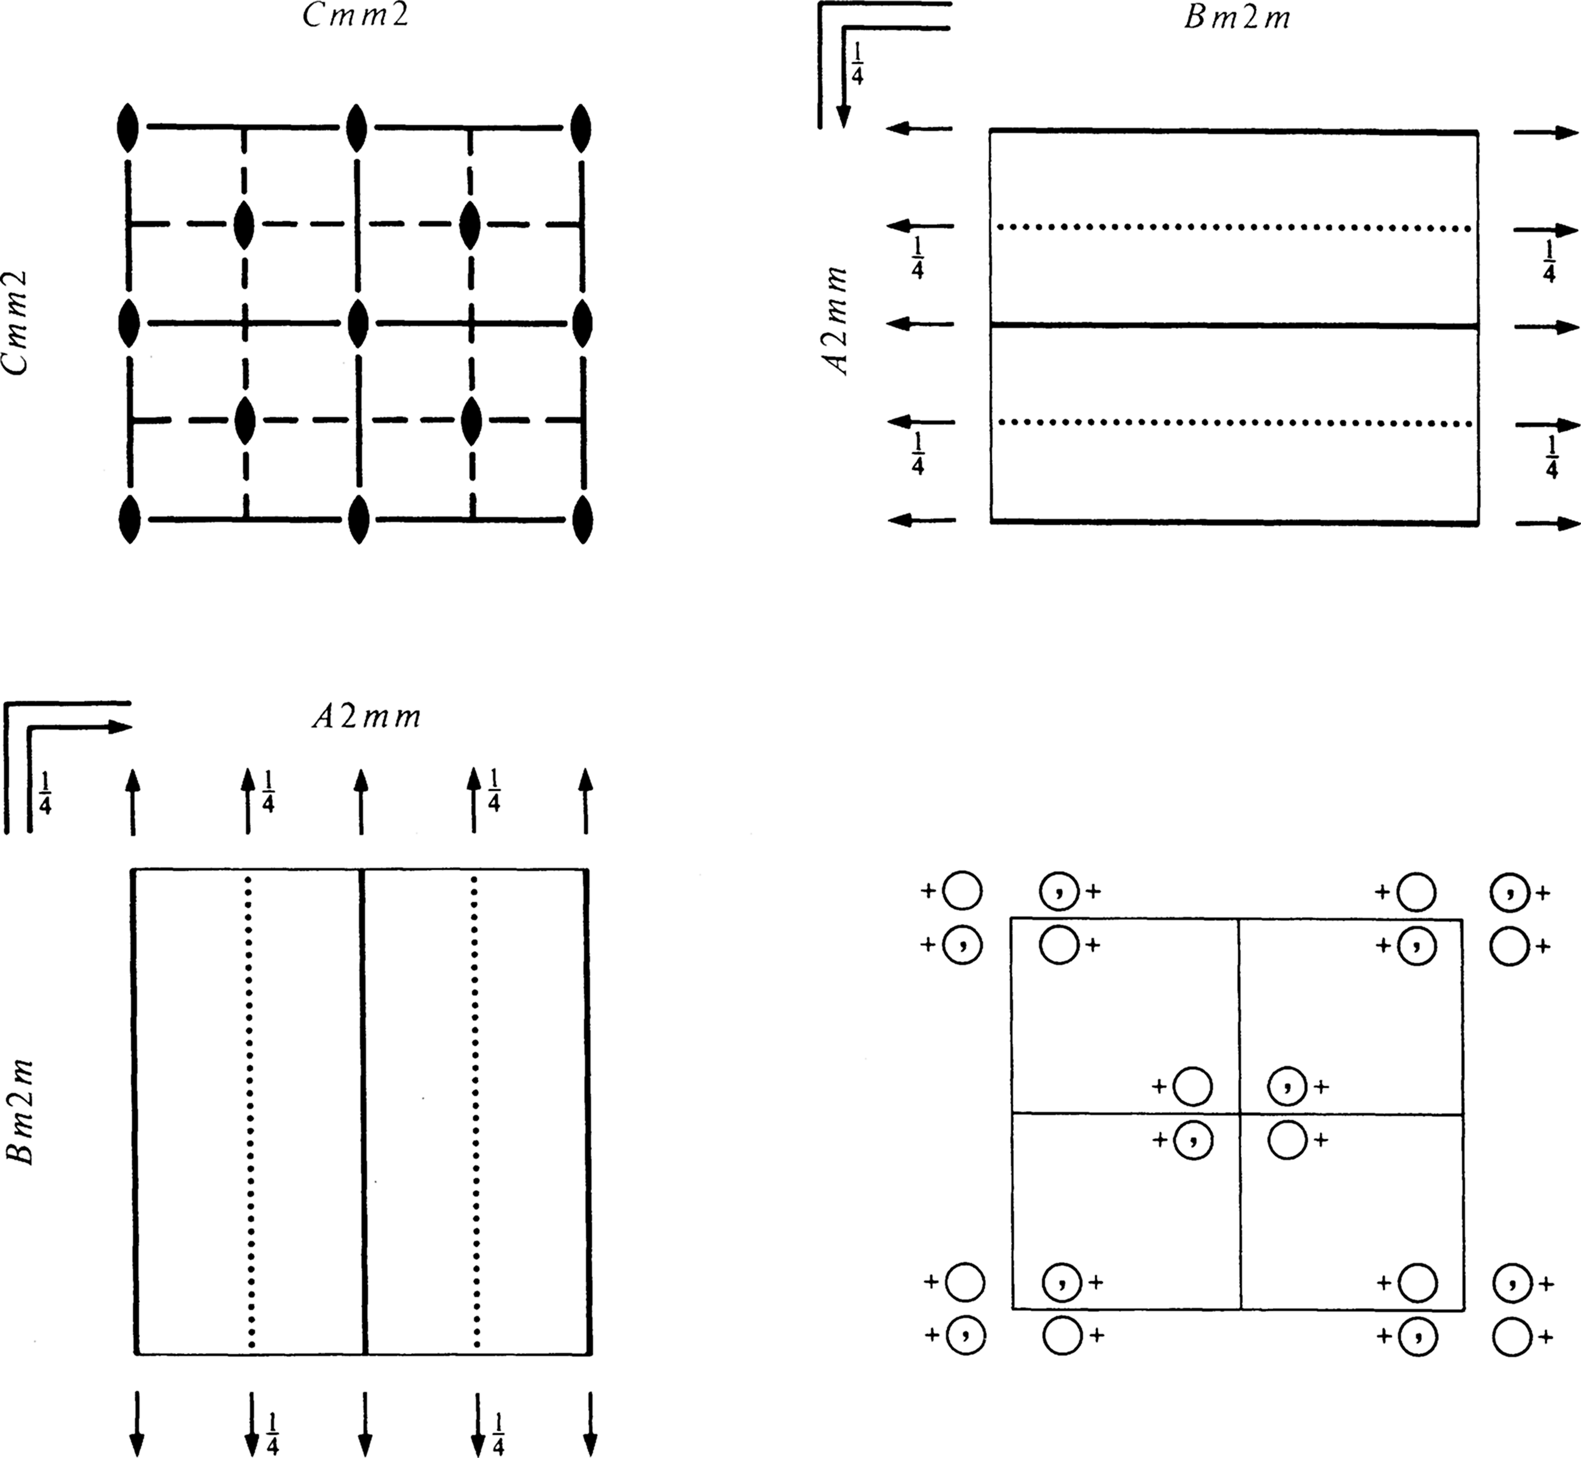 Space-group diagrams: projections of the symmetry elements and a diagram showing a set of equivalent points in the general position